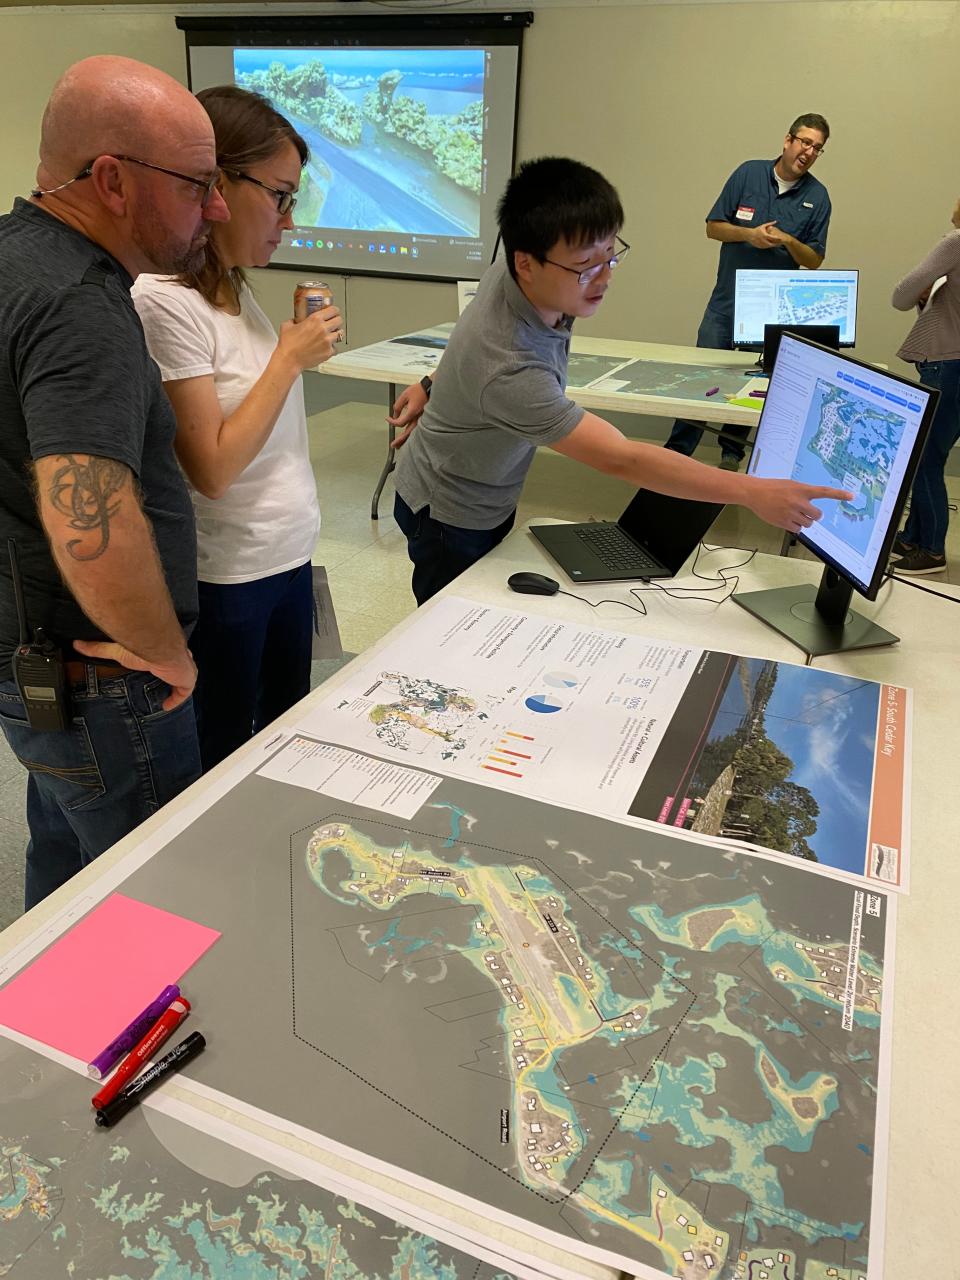 The results of the flooding vulnerability assessment were presented at a workshop to the Cedar Key community.